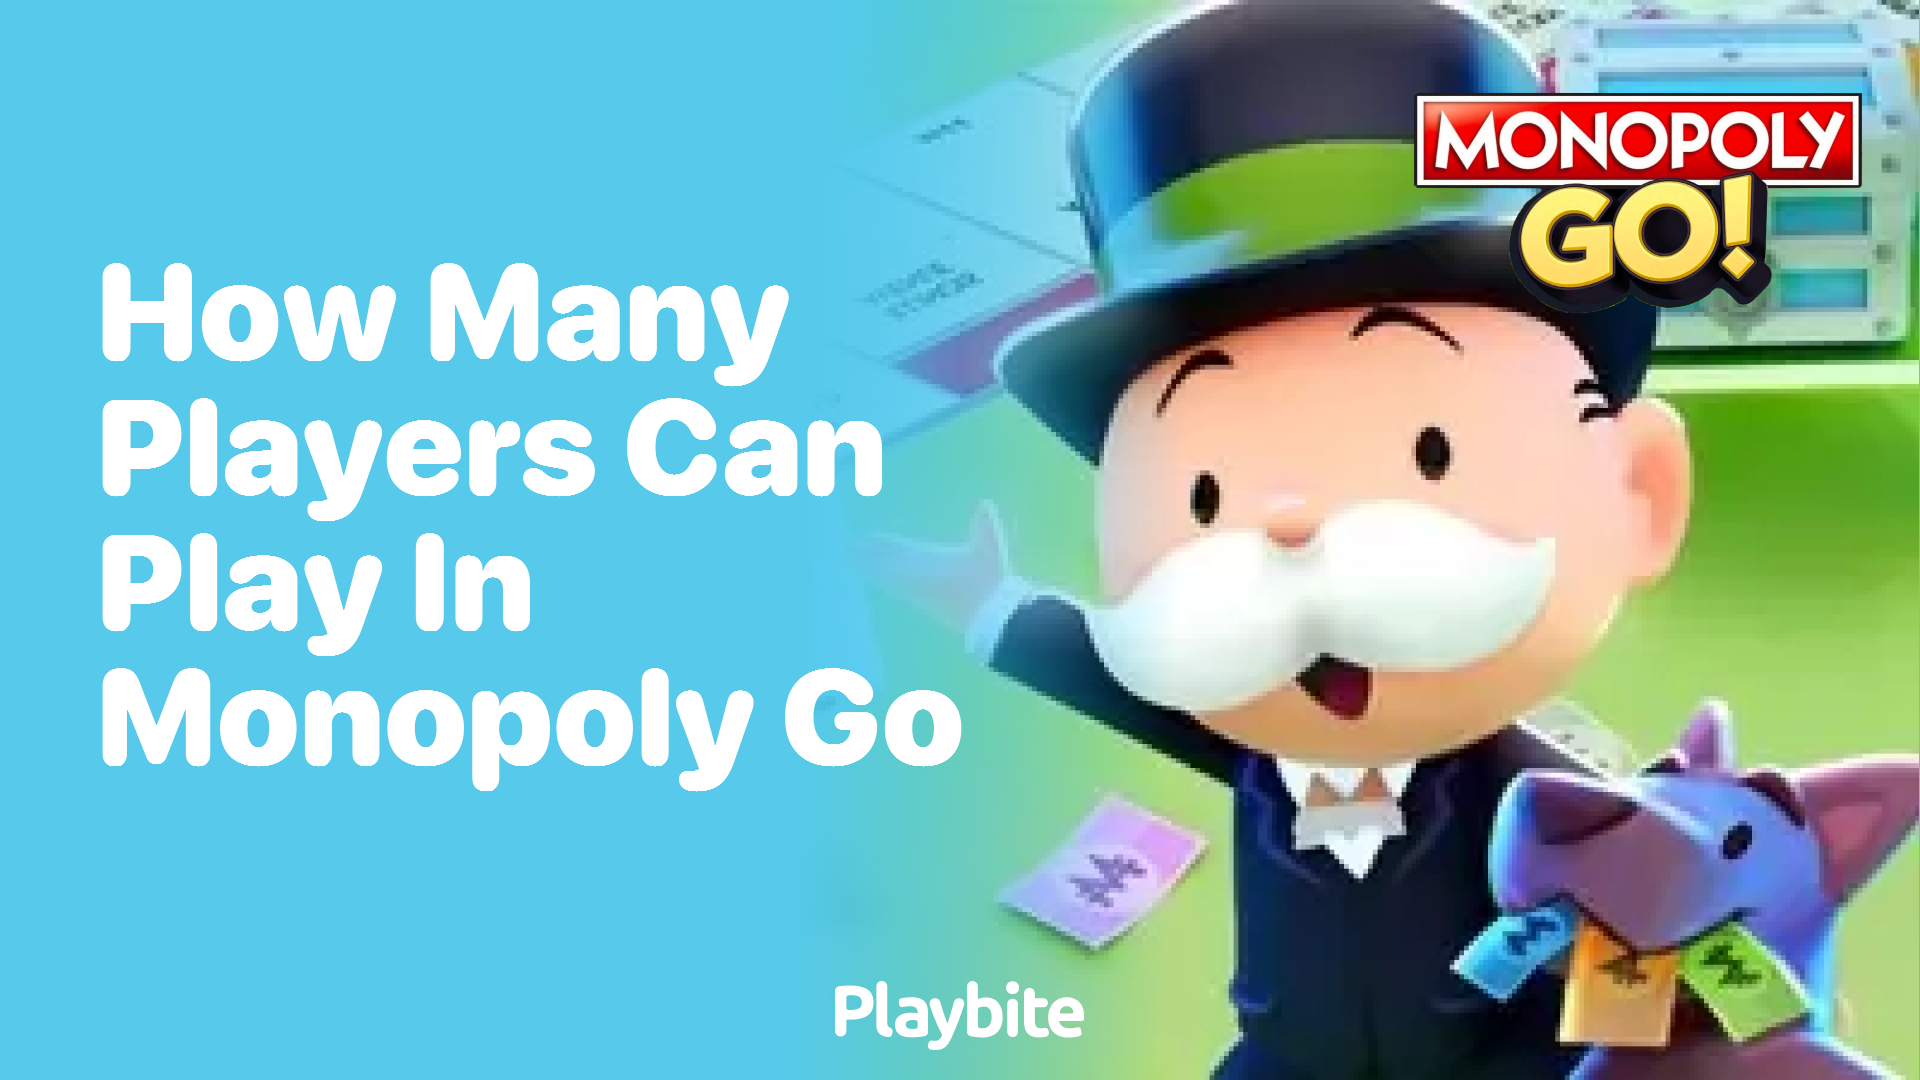 How Many Players Can Play in Monopoly Go?